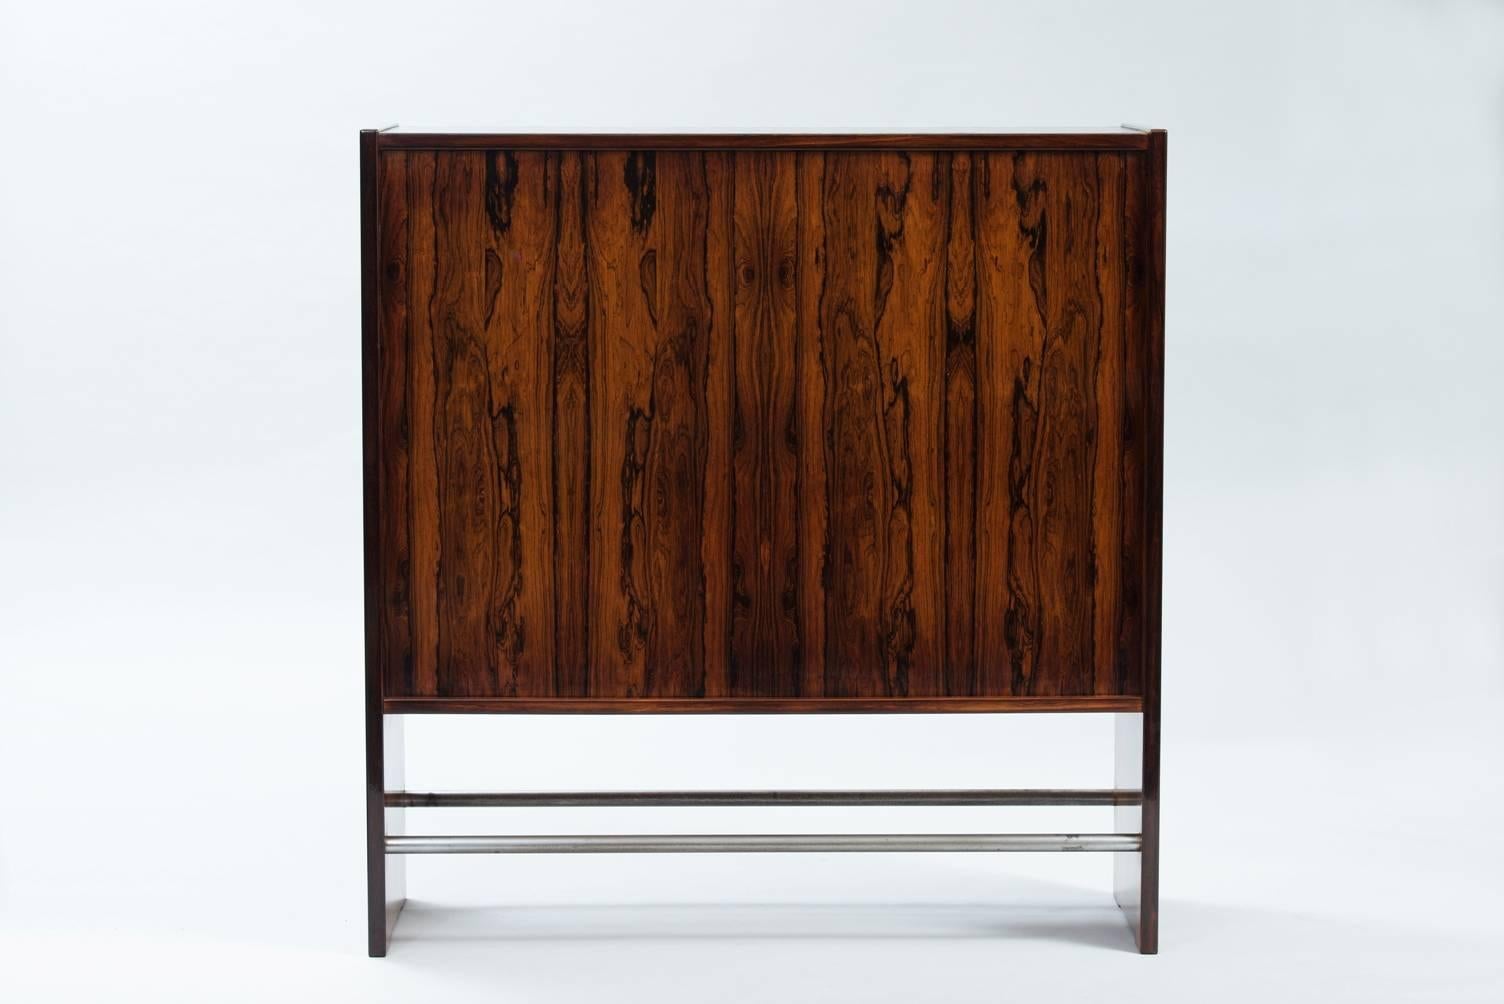 Rosewood bar cabinet HM3 model, it has rosewood veneer all-over, inside, outside, back, can be put in the middle of a room.
Producer: Heltborg furniture.